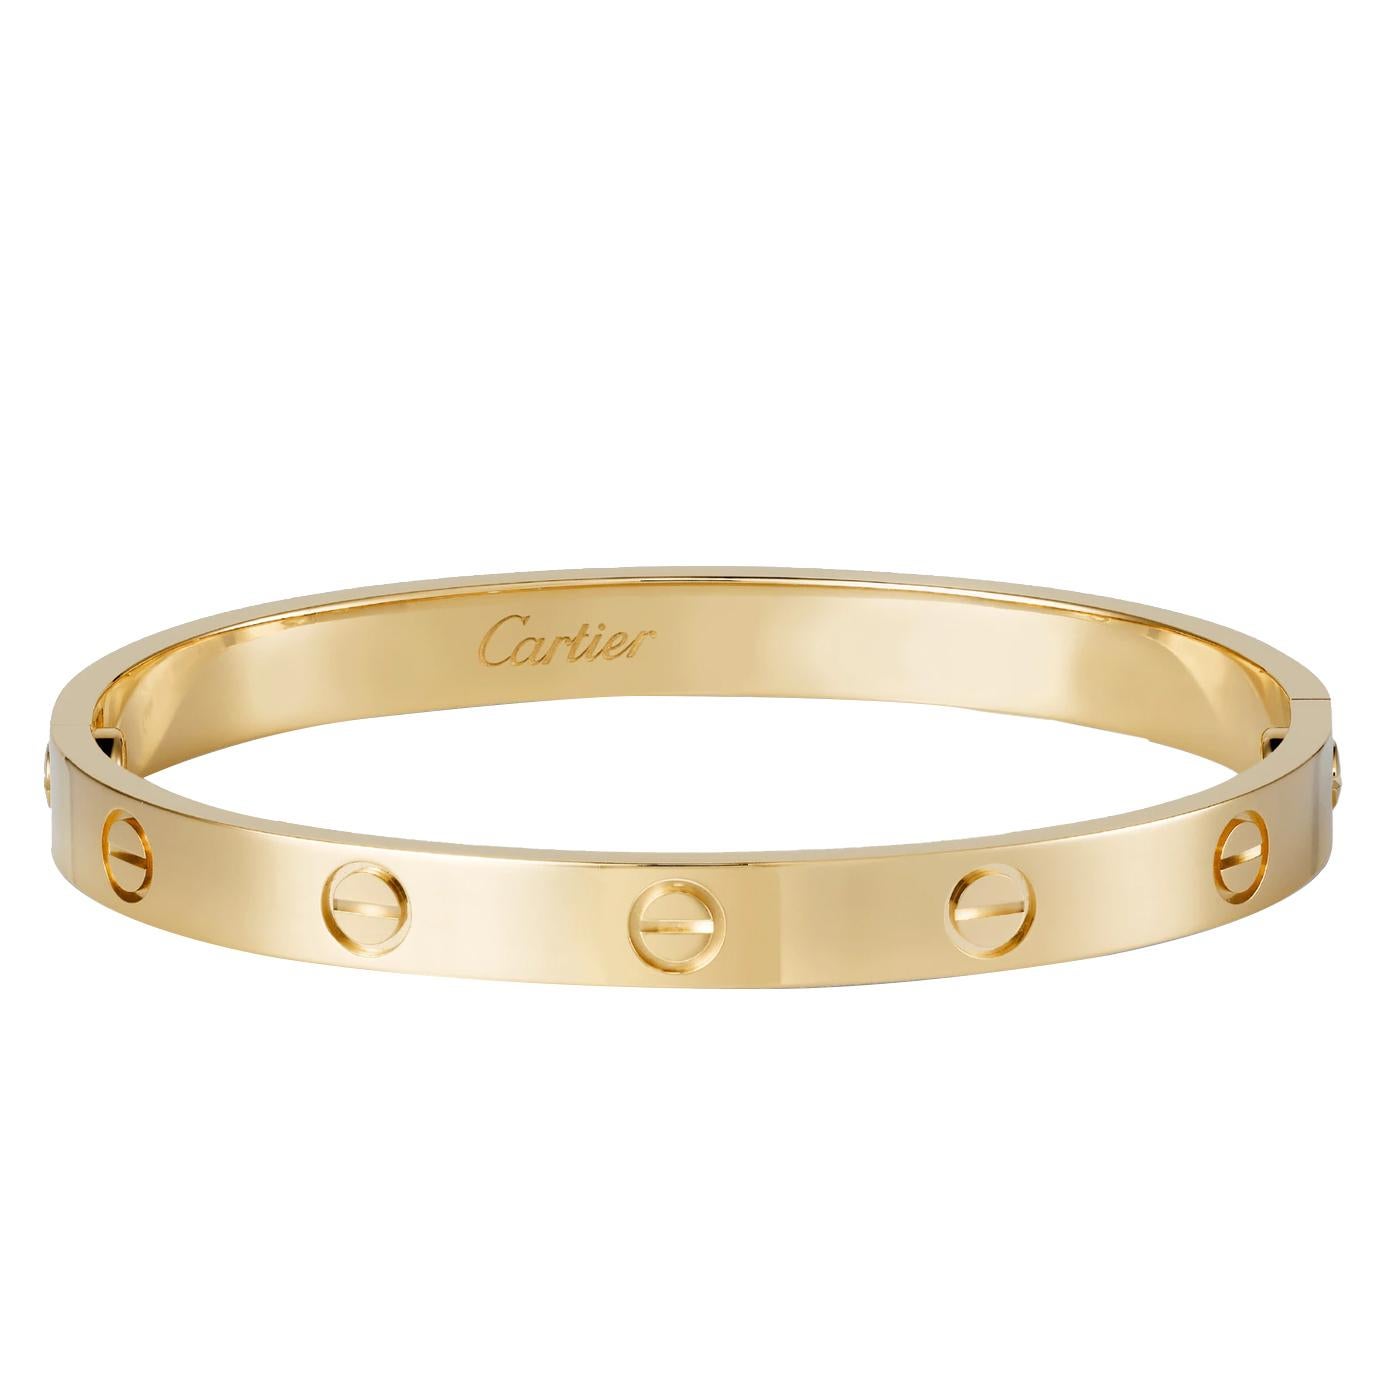 LOVE bracelet, 18K yellow gold (750/1000). Comes with a screwdriver. Width: 6.1 mm. Created in New York in 1969, the LOVE bracelet is an icon of jewelry design: a close-fitting, oval bracelet composed of two rigid arcs which are worn on the wrist